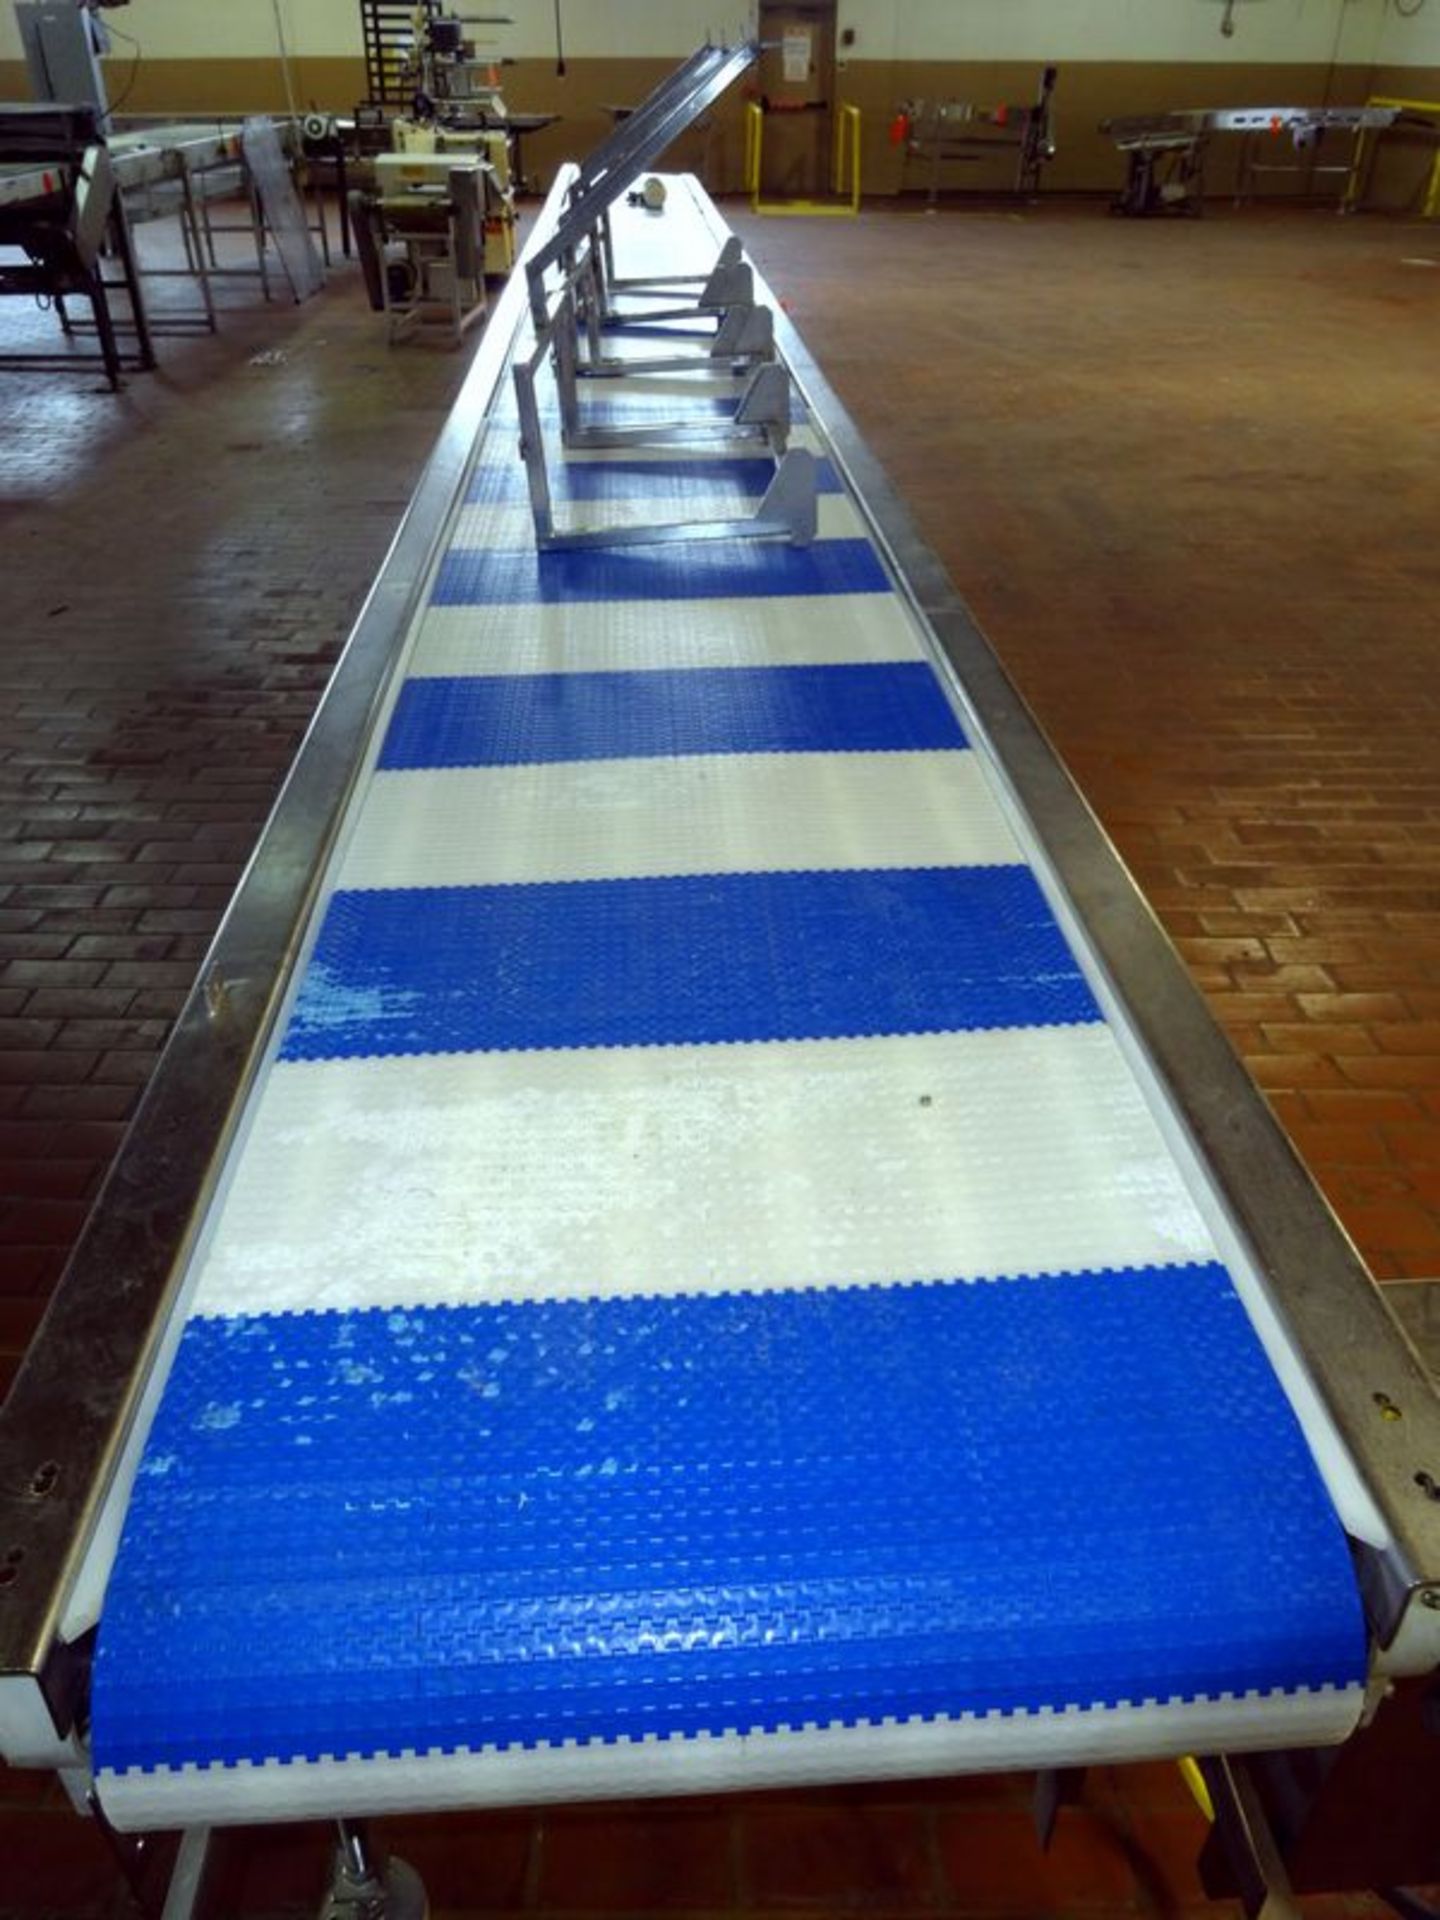 E-Quip plastic belt conveyor. Approximate 24" wide x 30' long. Stainless steel frame, no motor. - Image 4 of 5